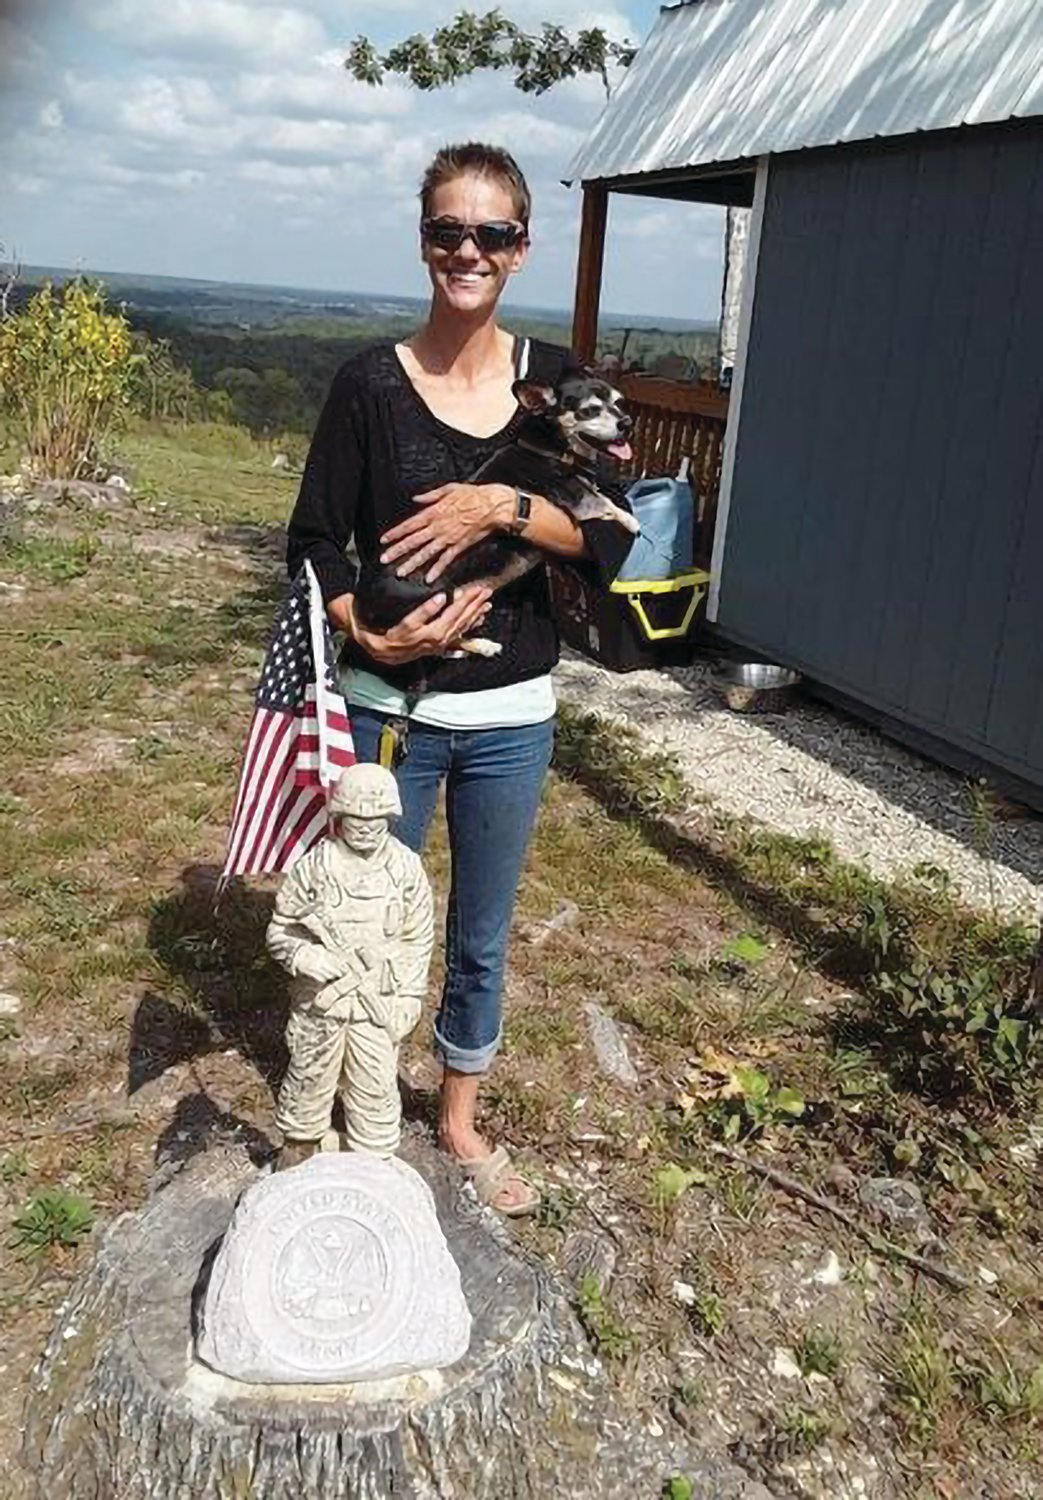 Retired Staff Sergeant Laura Crum with a marker for the United States Army outside her homesteader home in Cedar Gap.